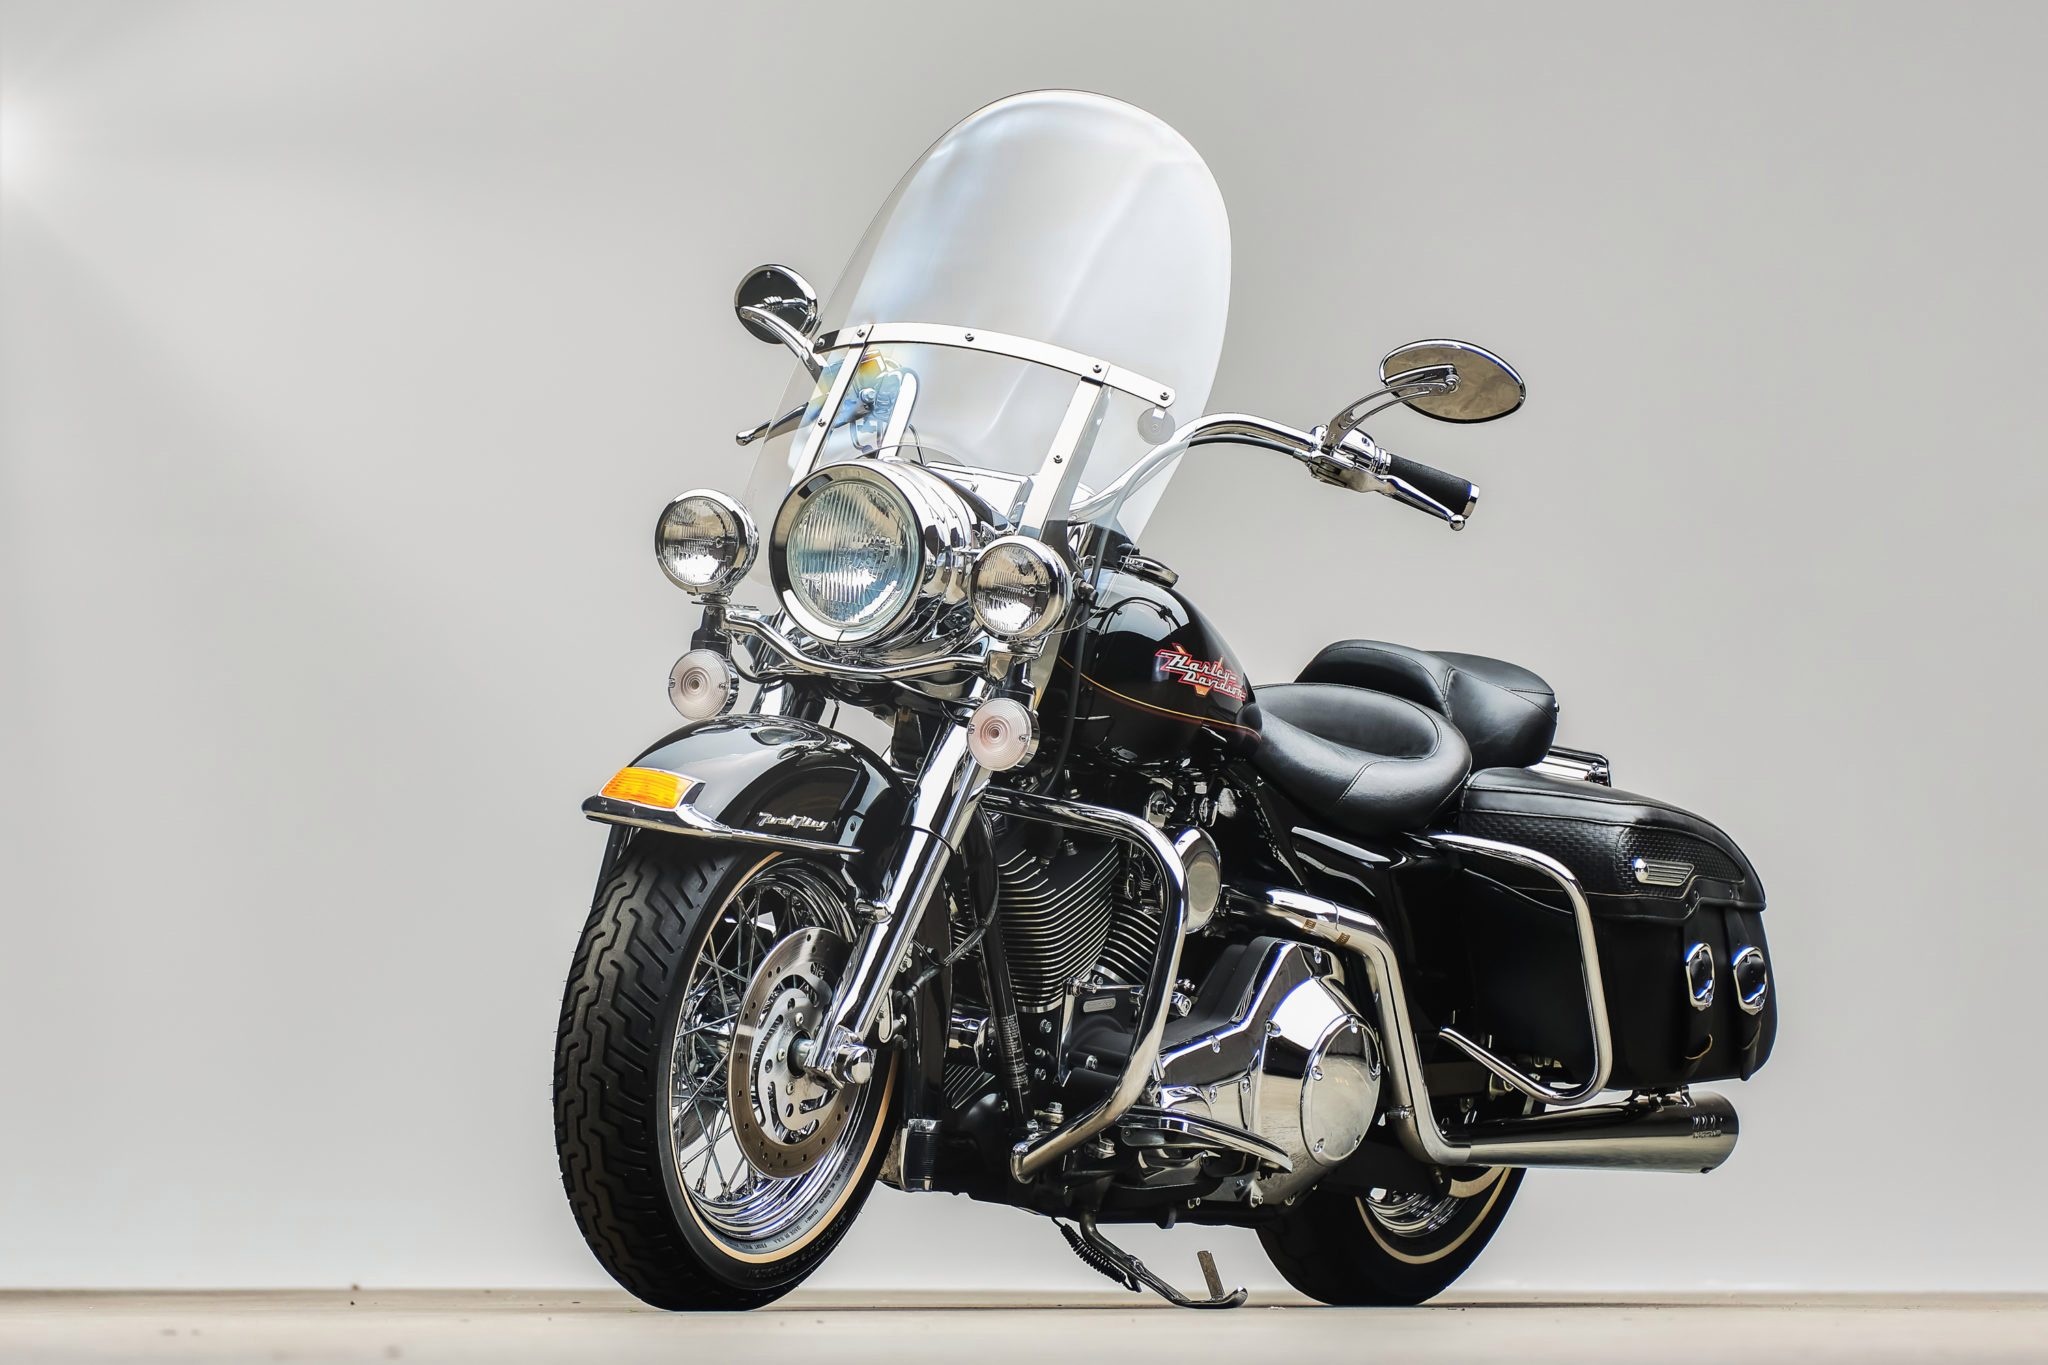 Harley-Davidson Road King, Iconic motorcycles, HD wallpapers, Timeless allure, 2050x1370 HD Desktop